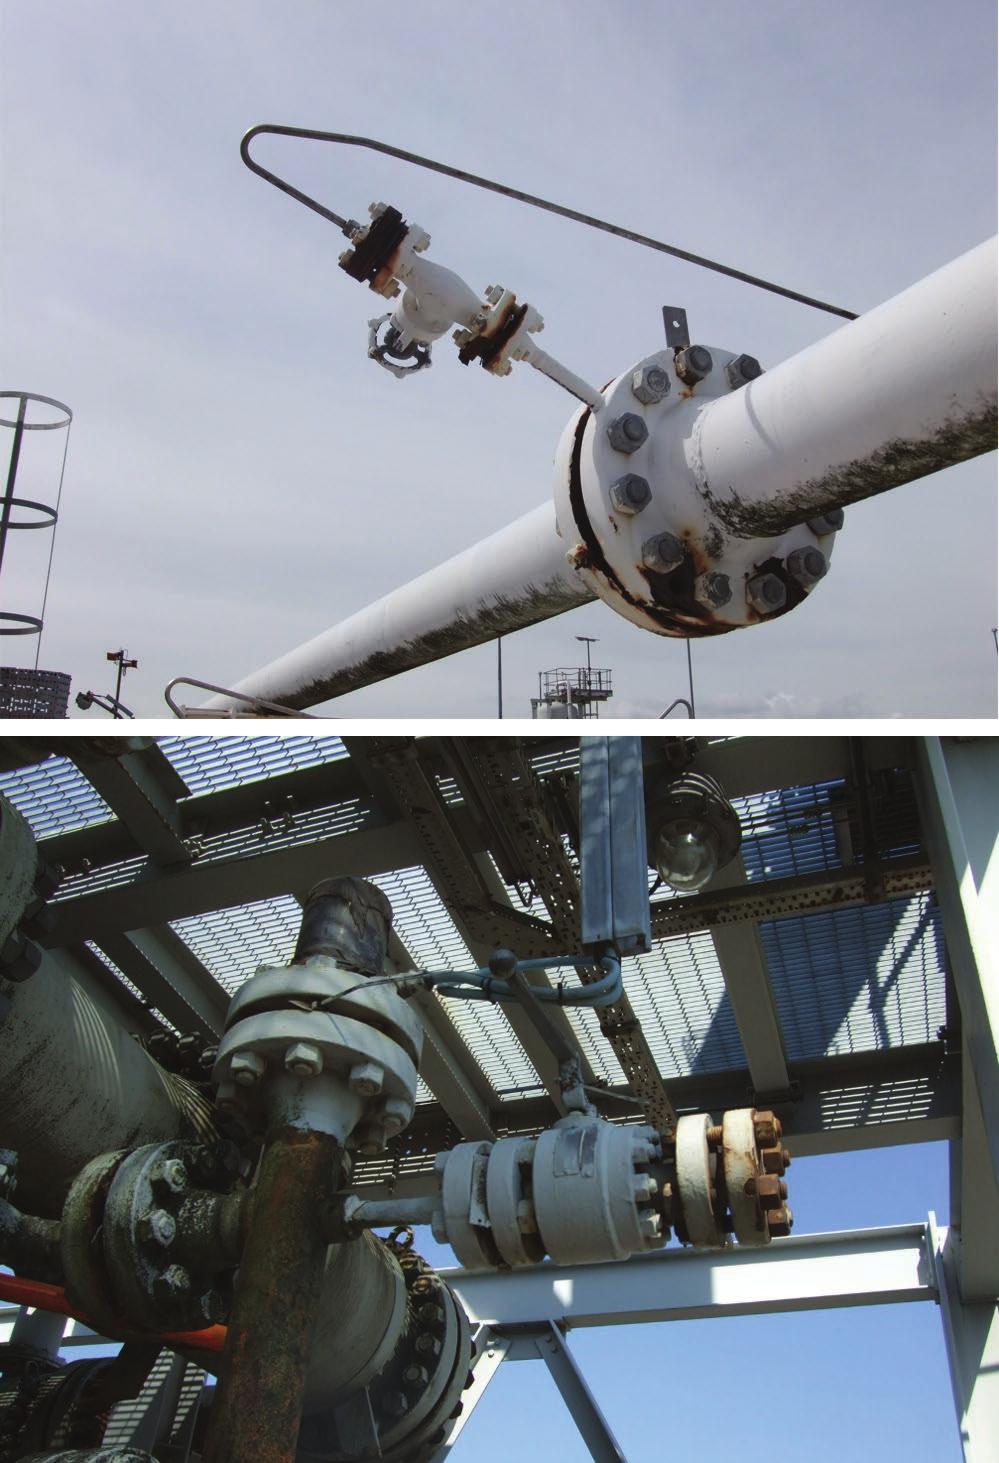 Vibration induced fatigue failures (VIFFs) of pipework smallbore connections (SBCs) due to turbulent flow excitation continue to occur in process piping systems, resulting in elevated safety risks